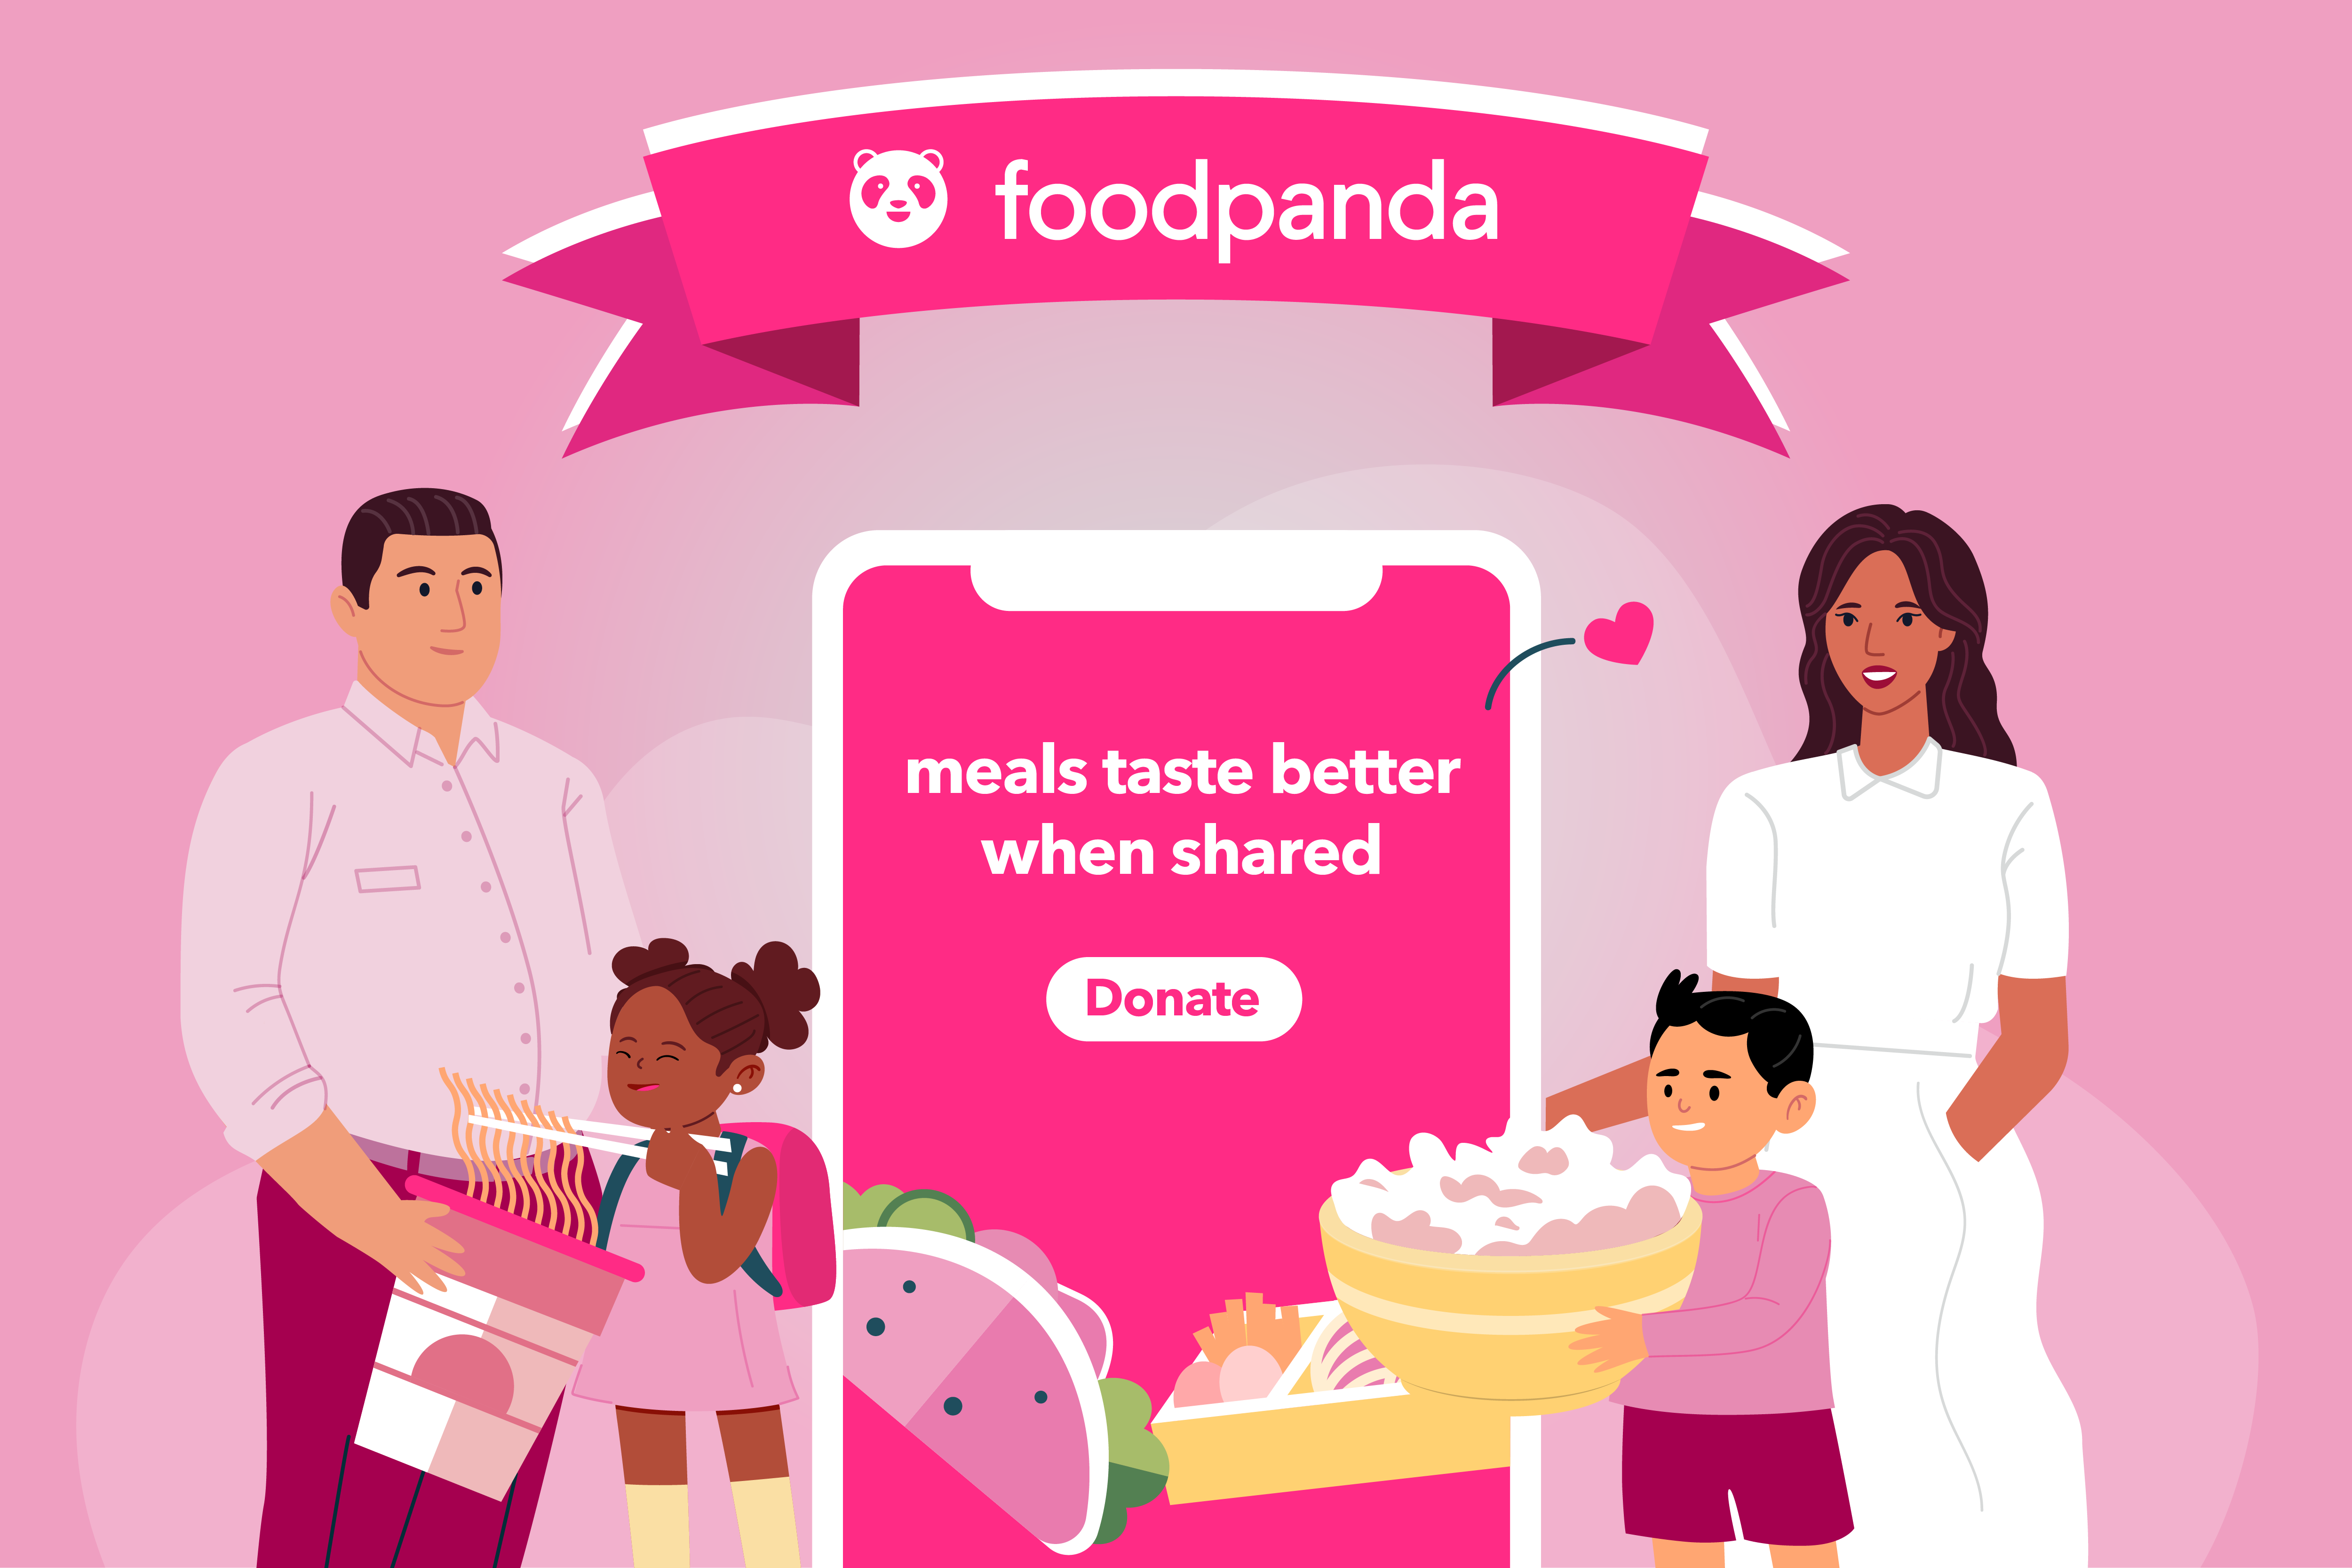 Image - A Spotlight on World Hunger Day 2022:  foodpanda launches meal donation feature in Asia, in support of the United Nations World Food Programme and local food banks